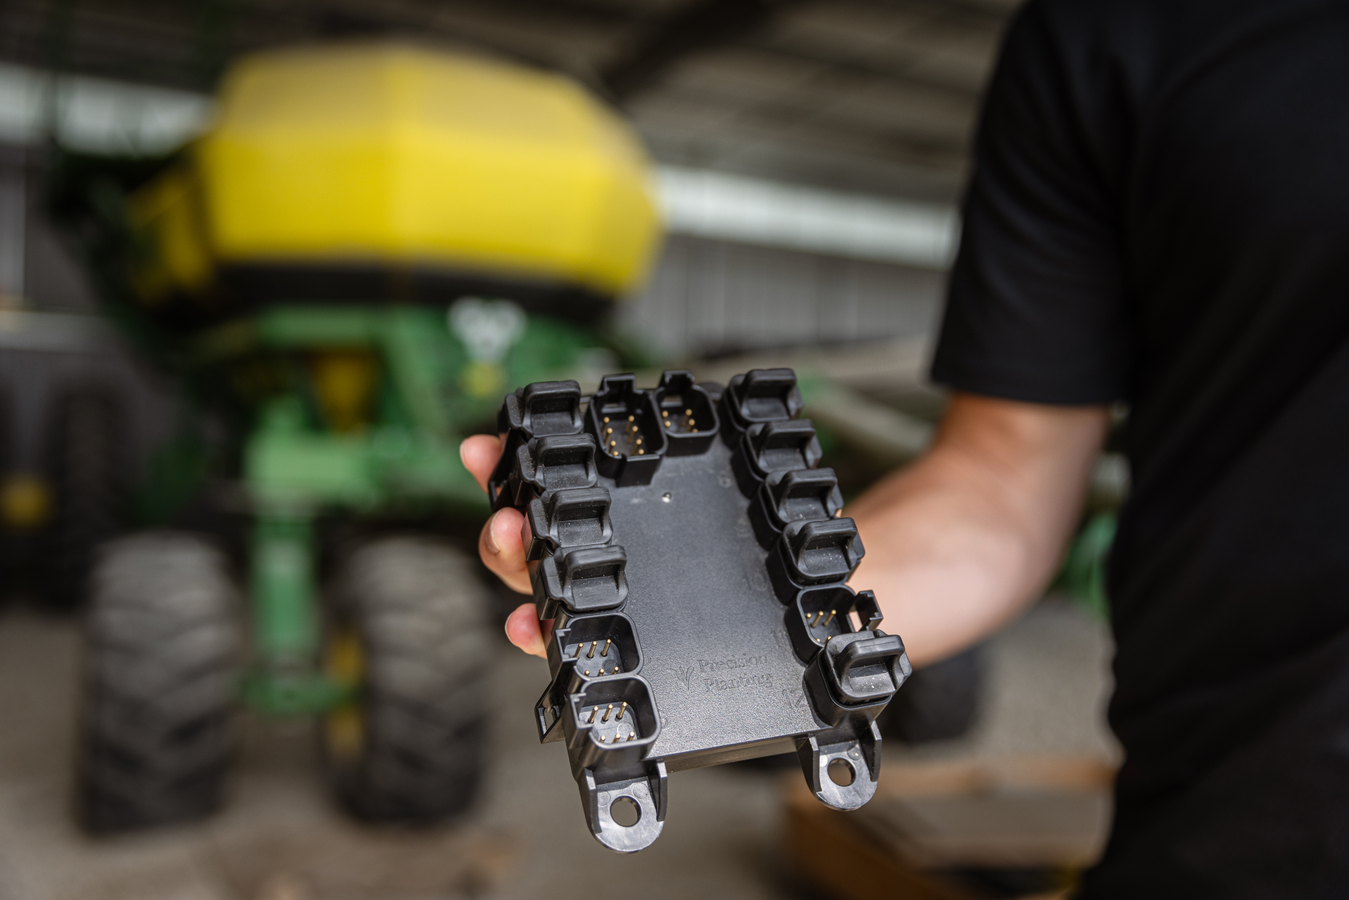 Precision Planting Clarity system for air seeders, drills, and dry fertilizer applicators